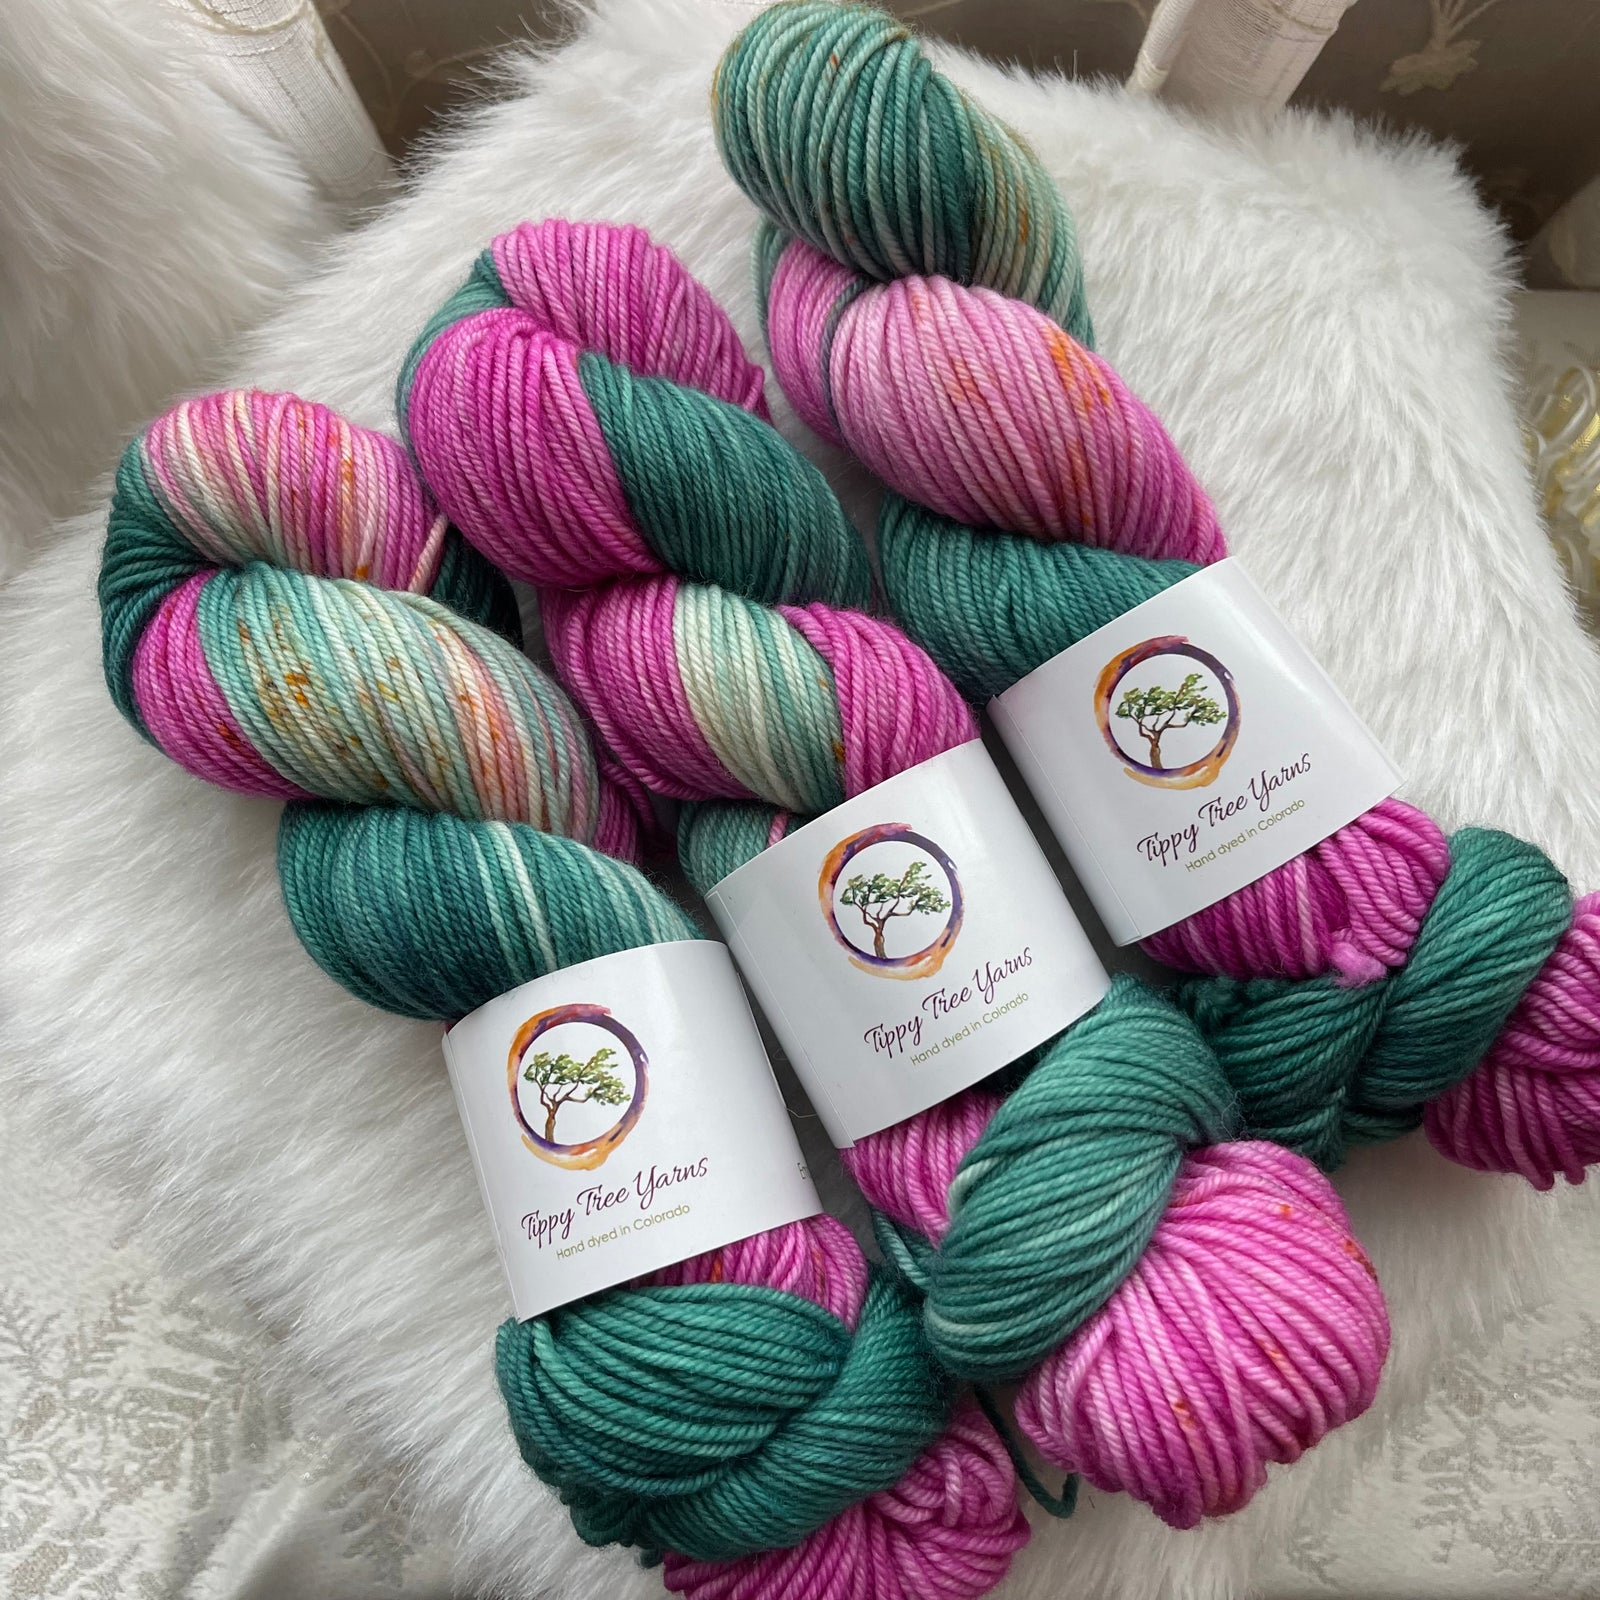 ROSABELLA - Dyed to Order - Hand Dyed Yarn Skein - Tippy Tree Yarns